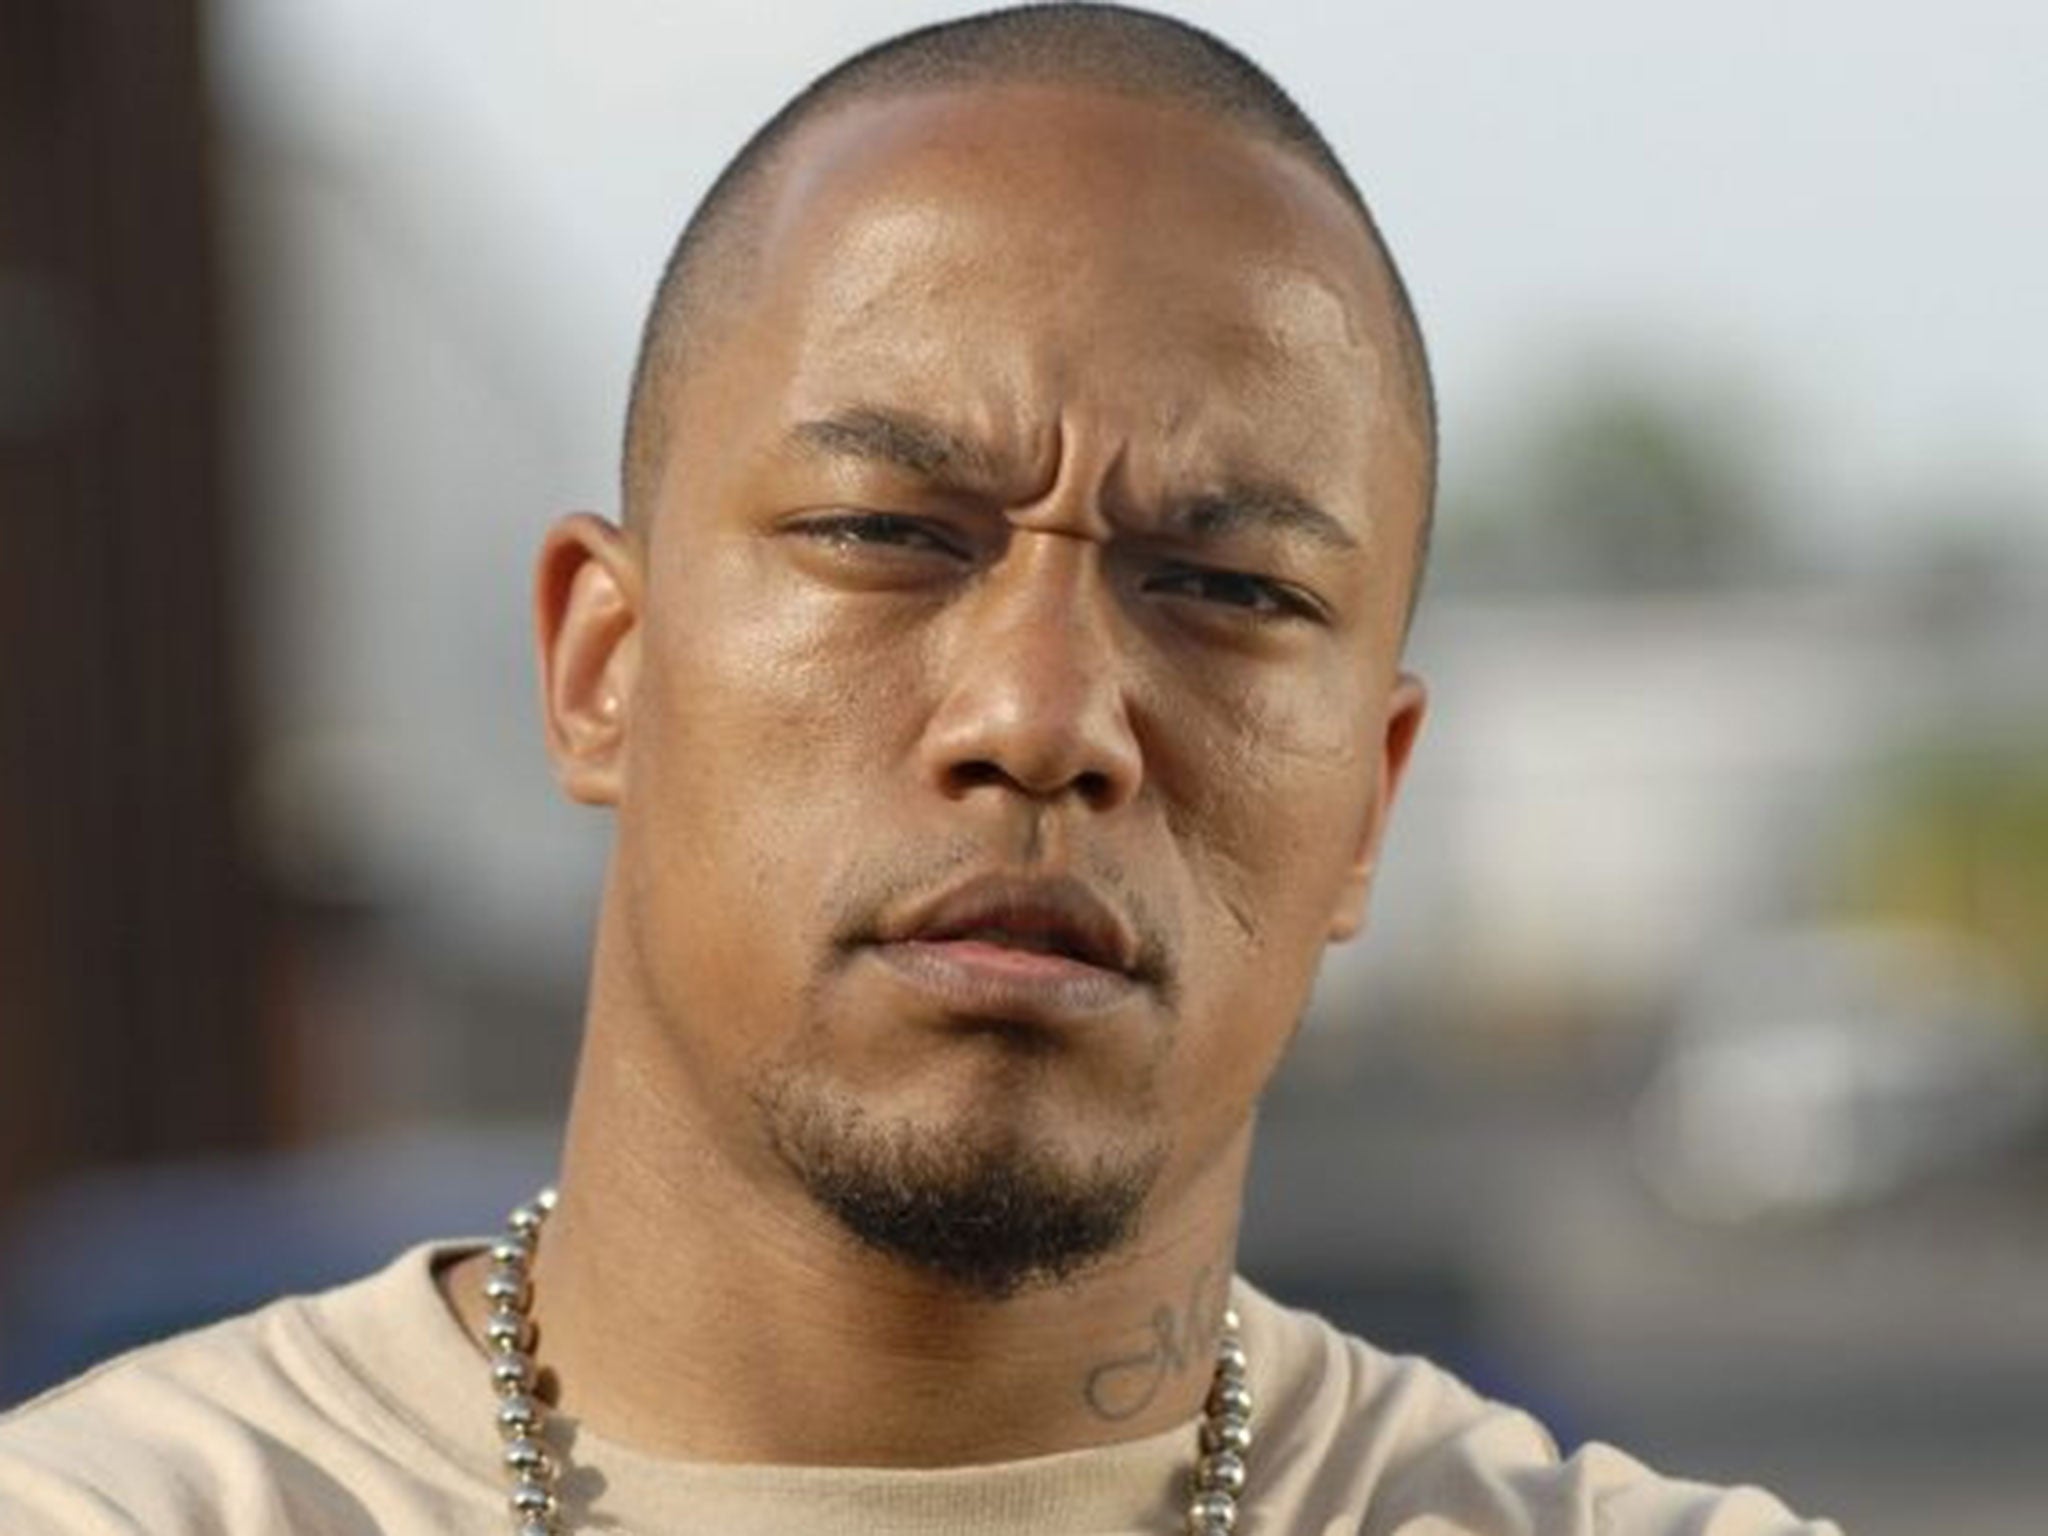 Denis Cuspert used to rap in Berlin as Deso Dogg before going to fight for Isis